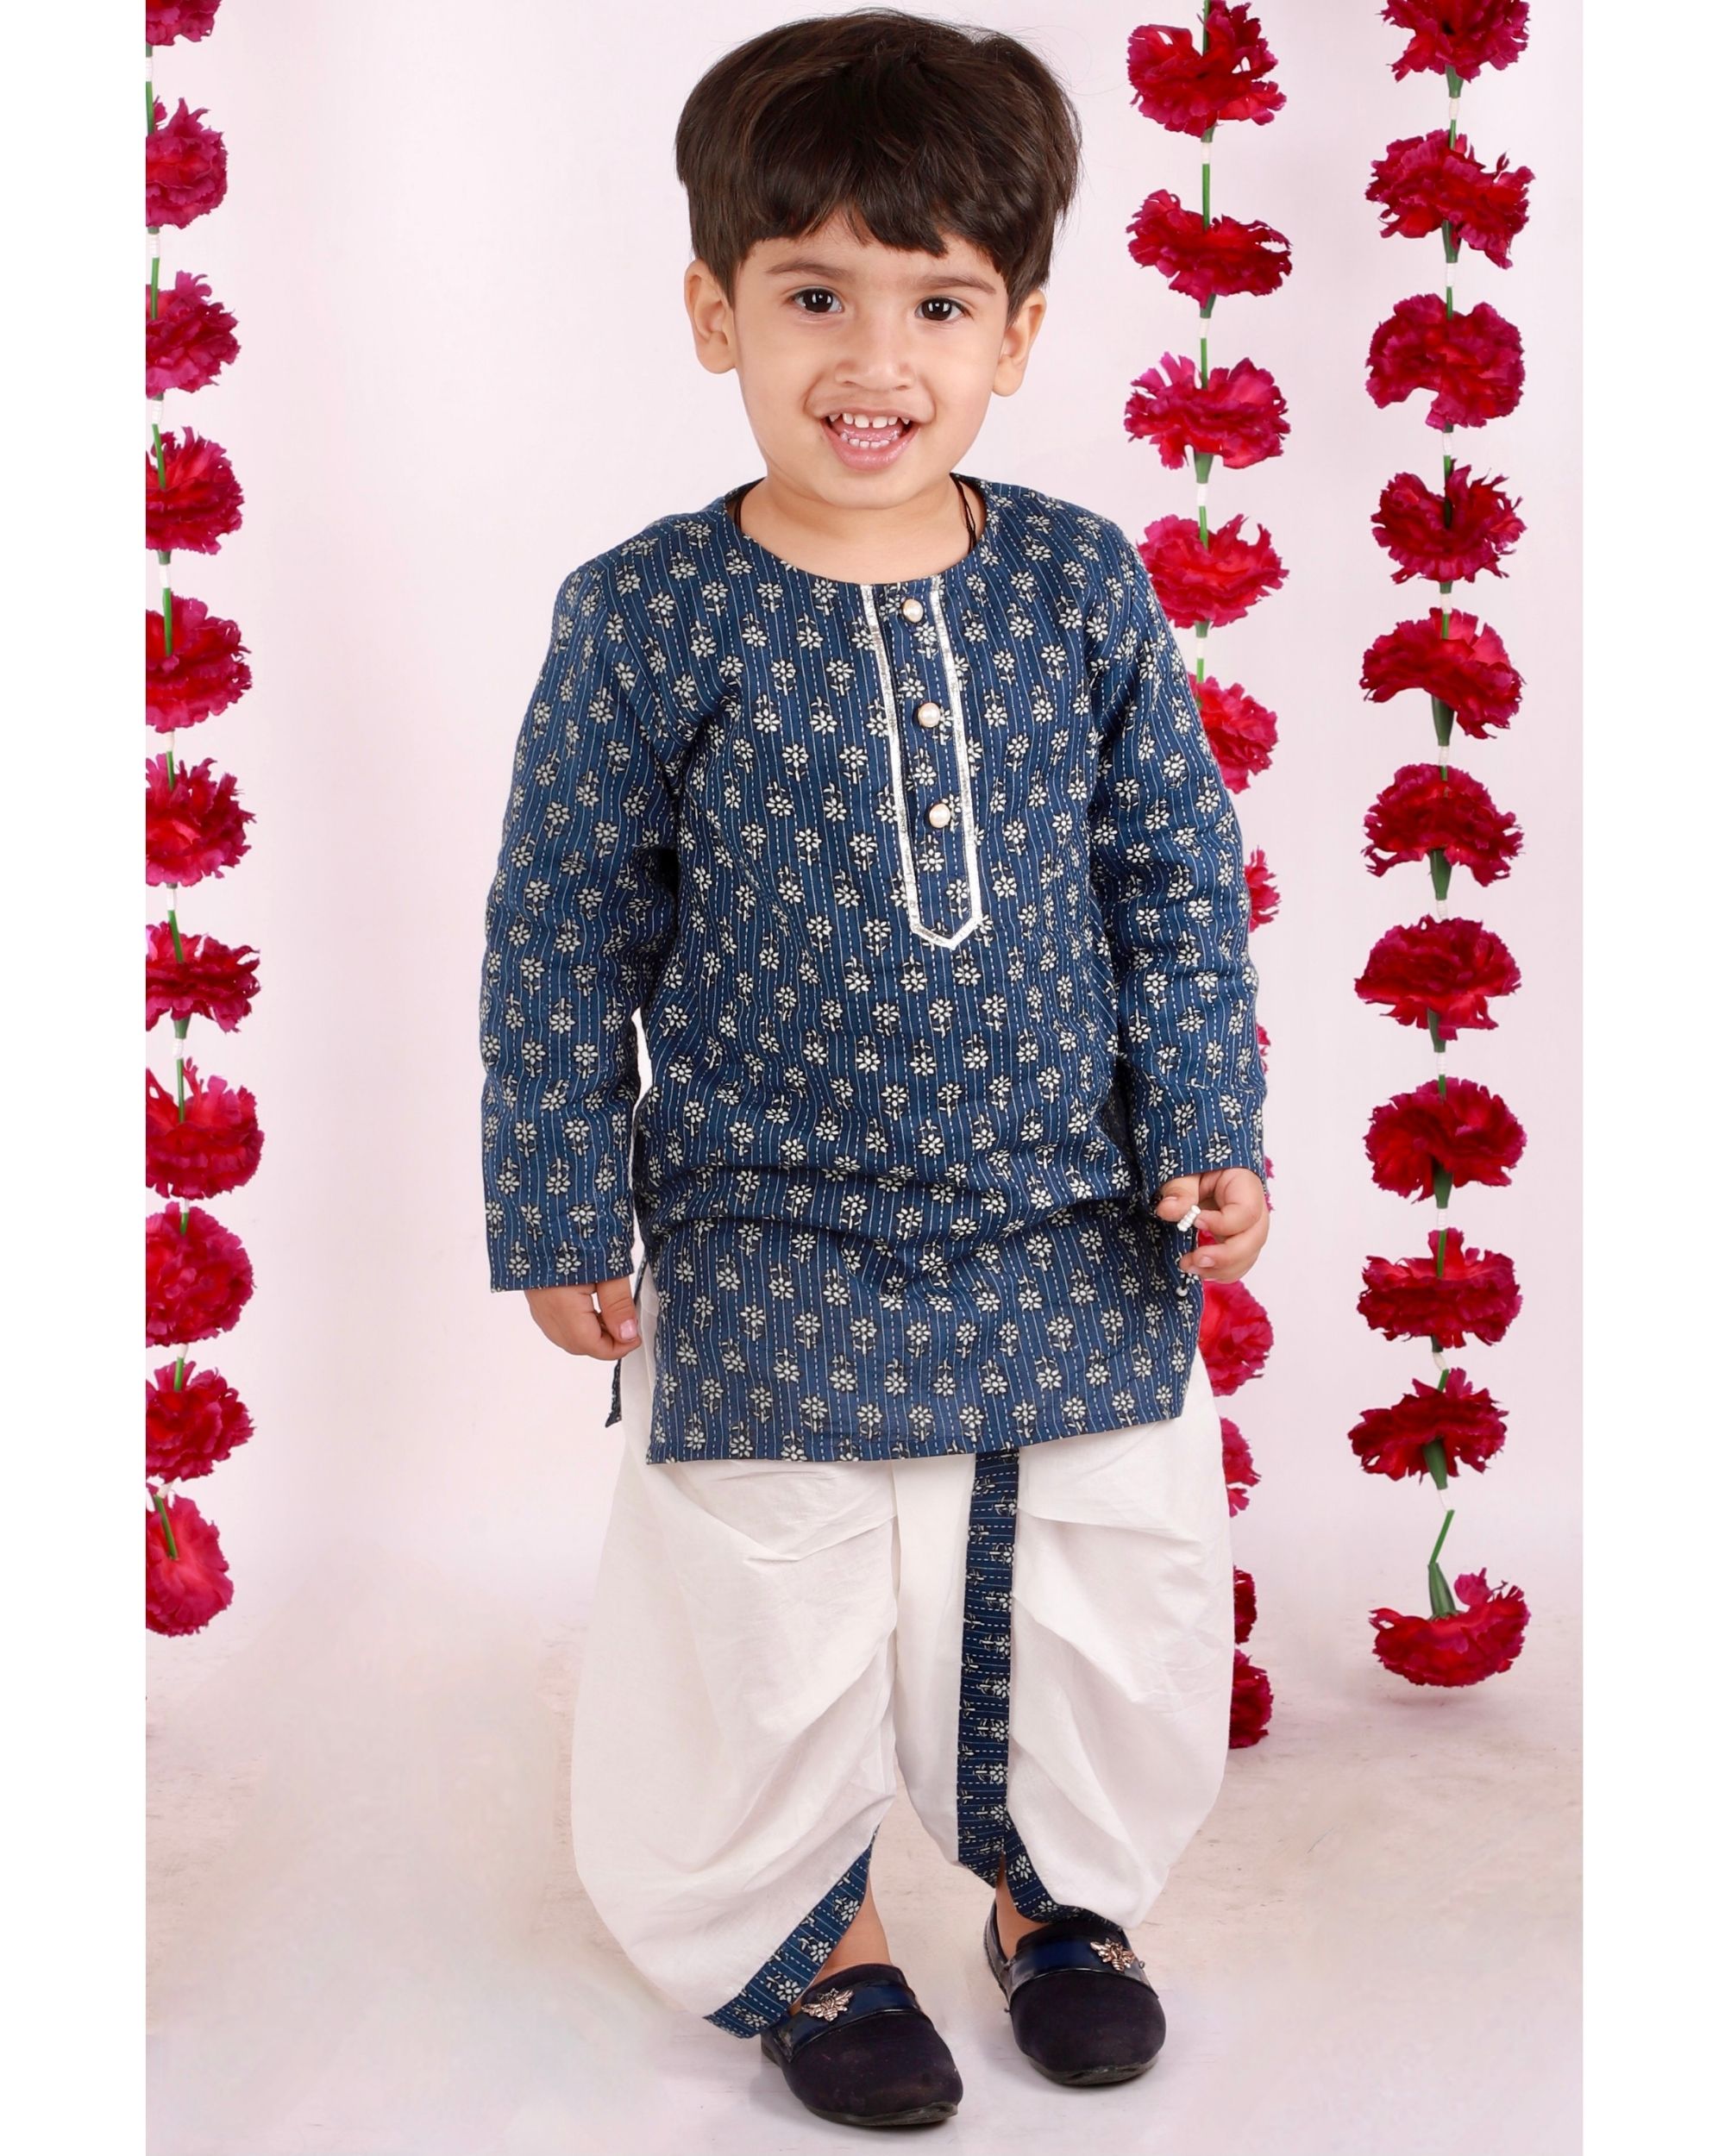 Indigo and white floral kantha embroidered kurta with dhoti - set of two